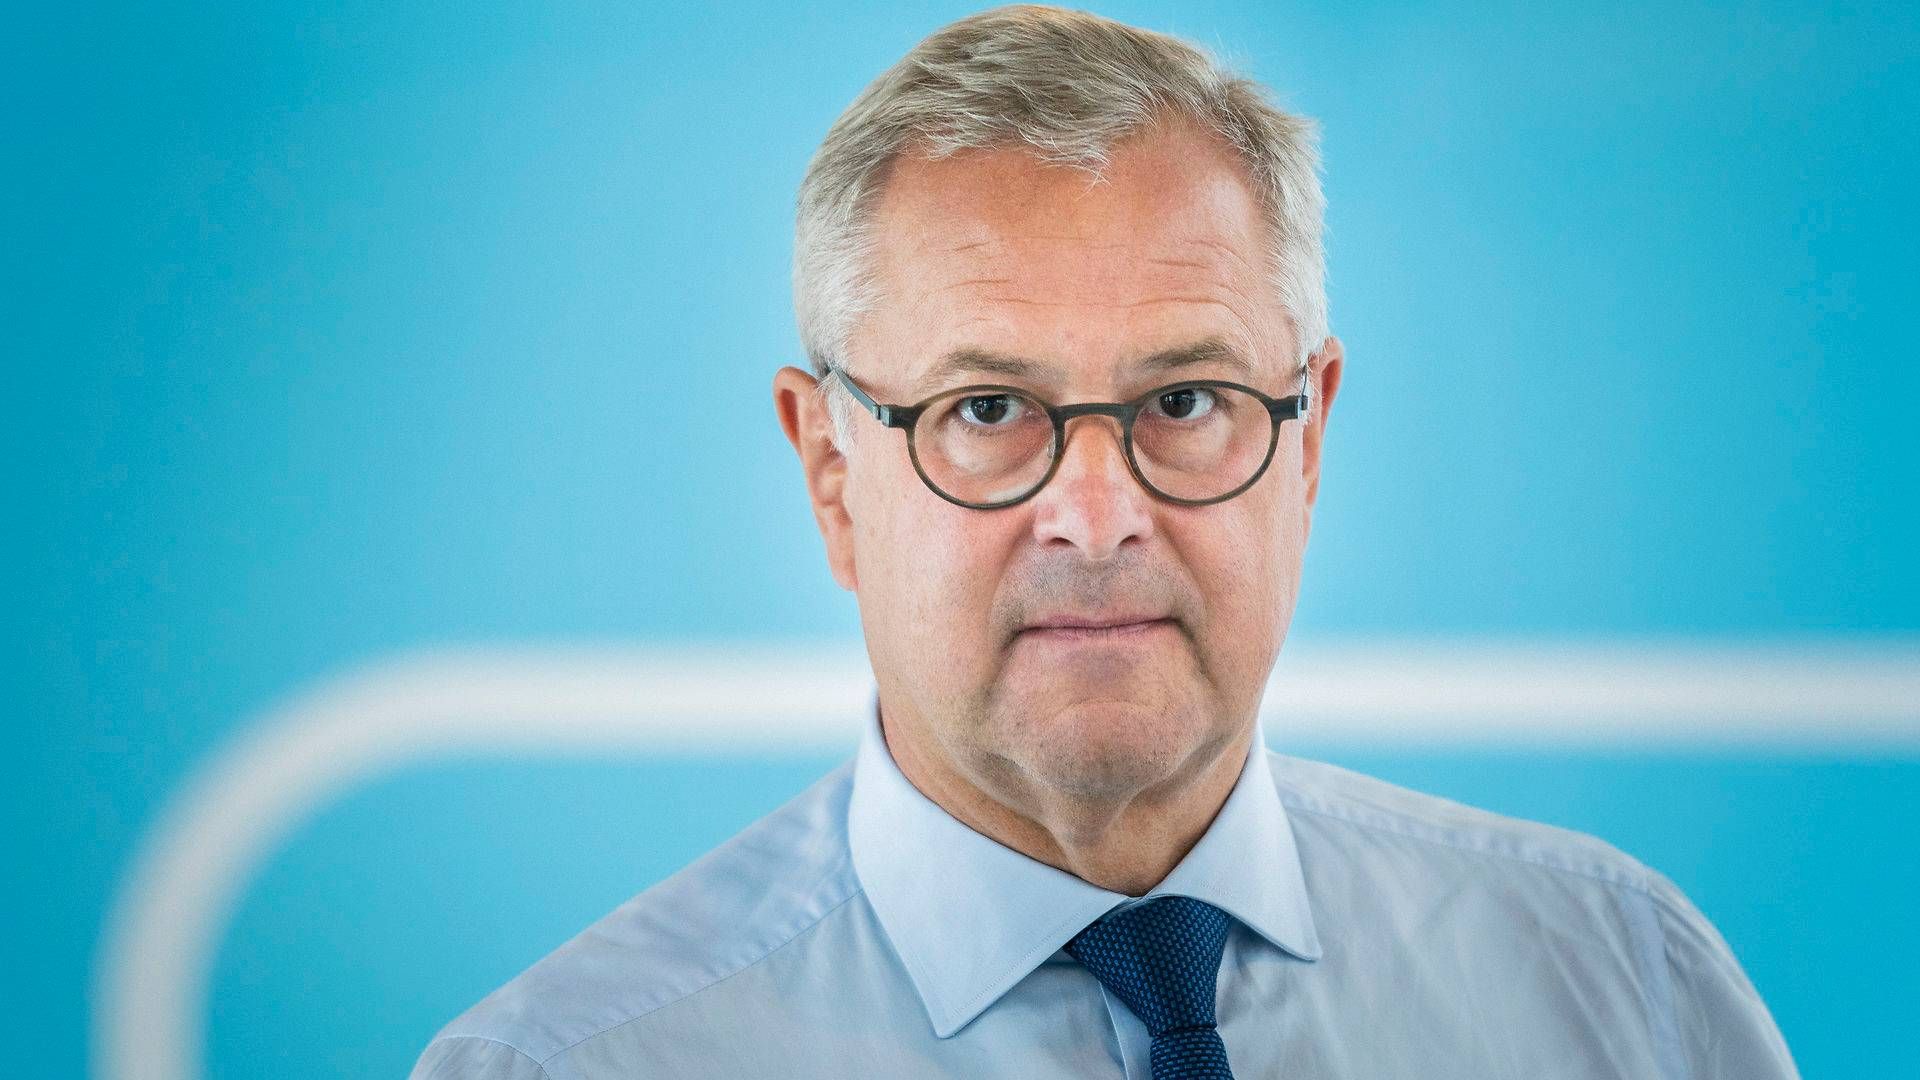 Maersk chief executive Søren Skou cannot rule out that some of the shipping company's ships may come to a stand still due to issues with changing crews. | Photo: Martin Sylvest/Ritzau Scanpix